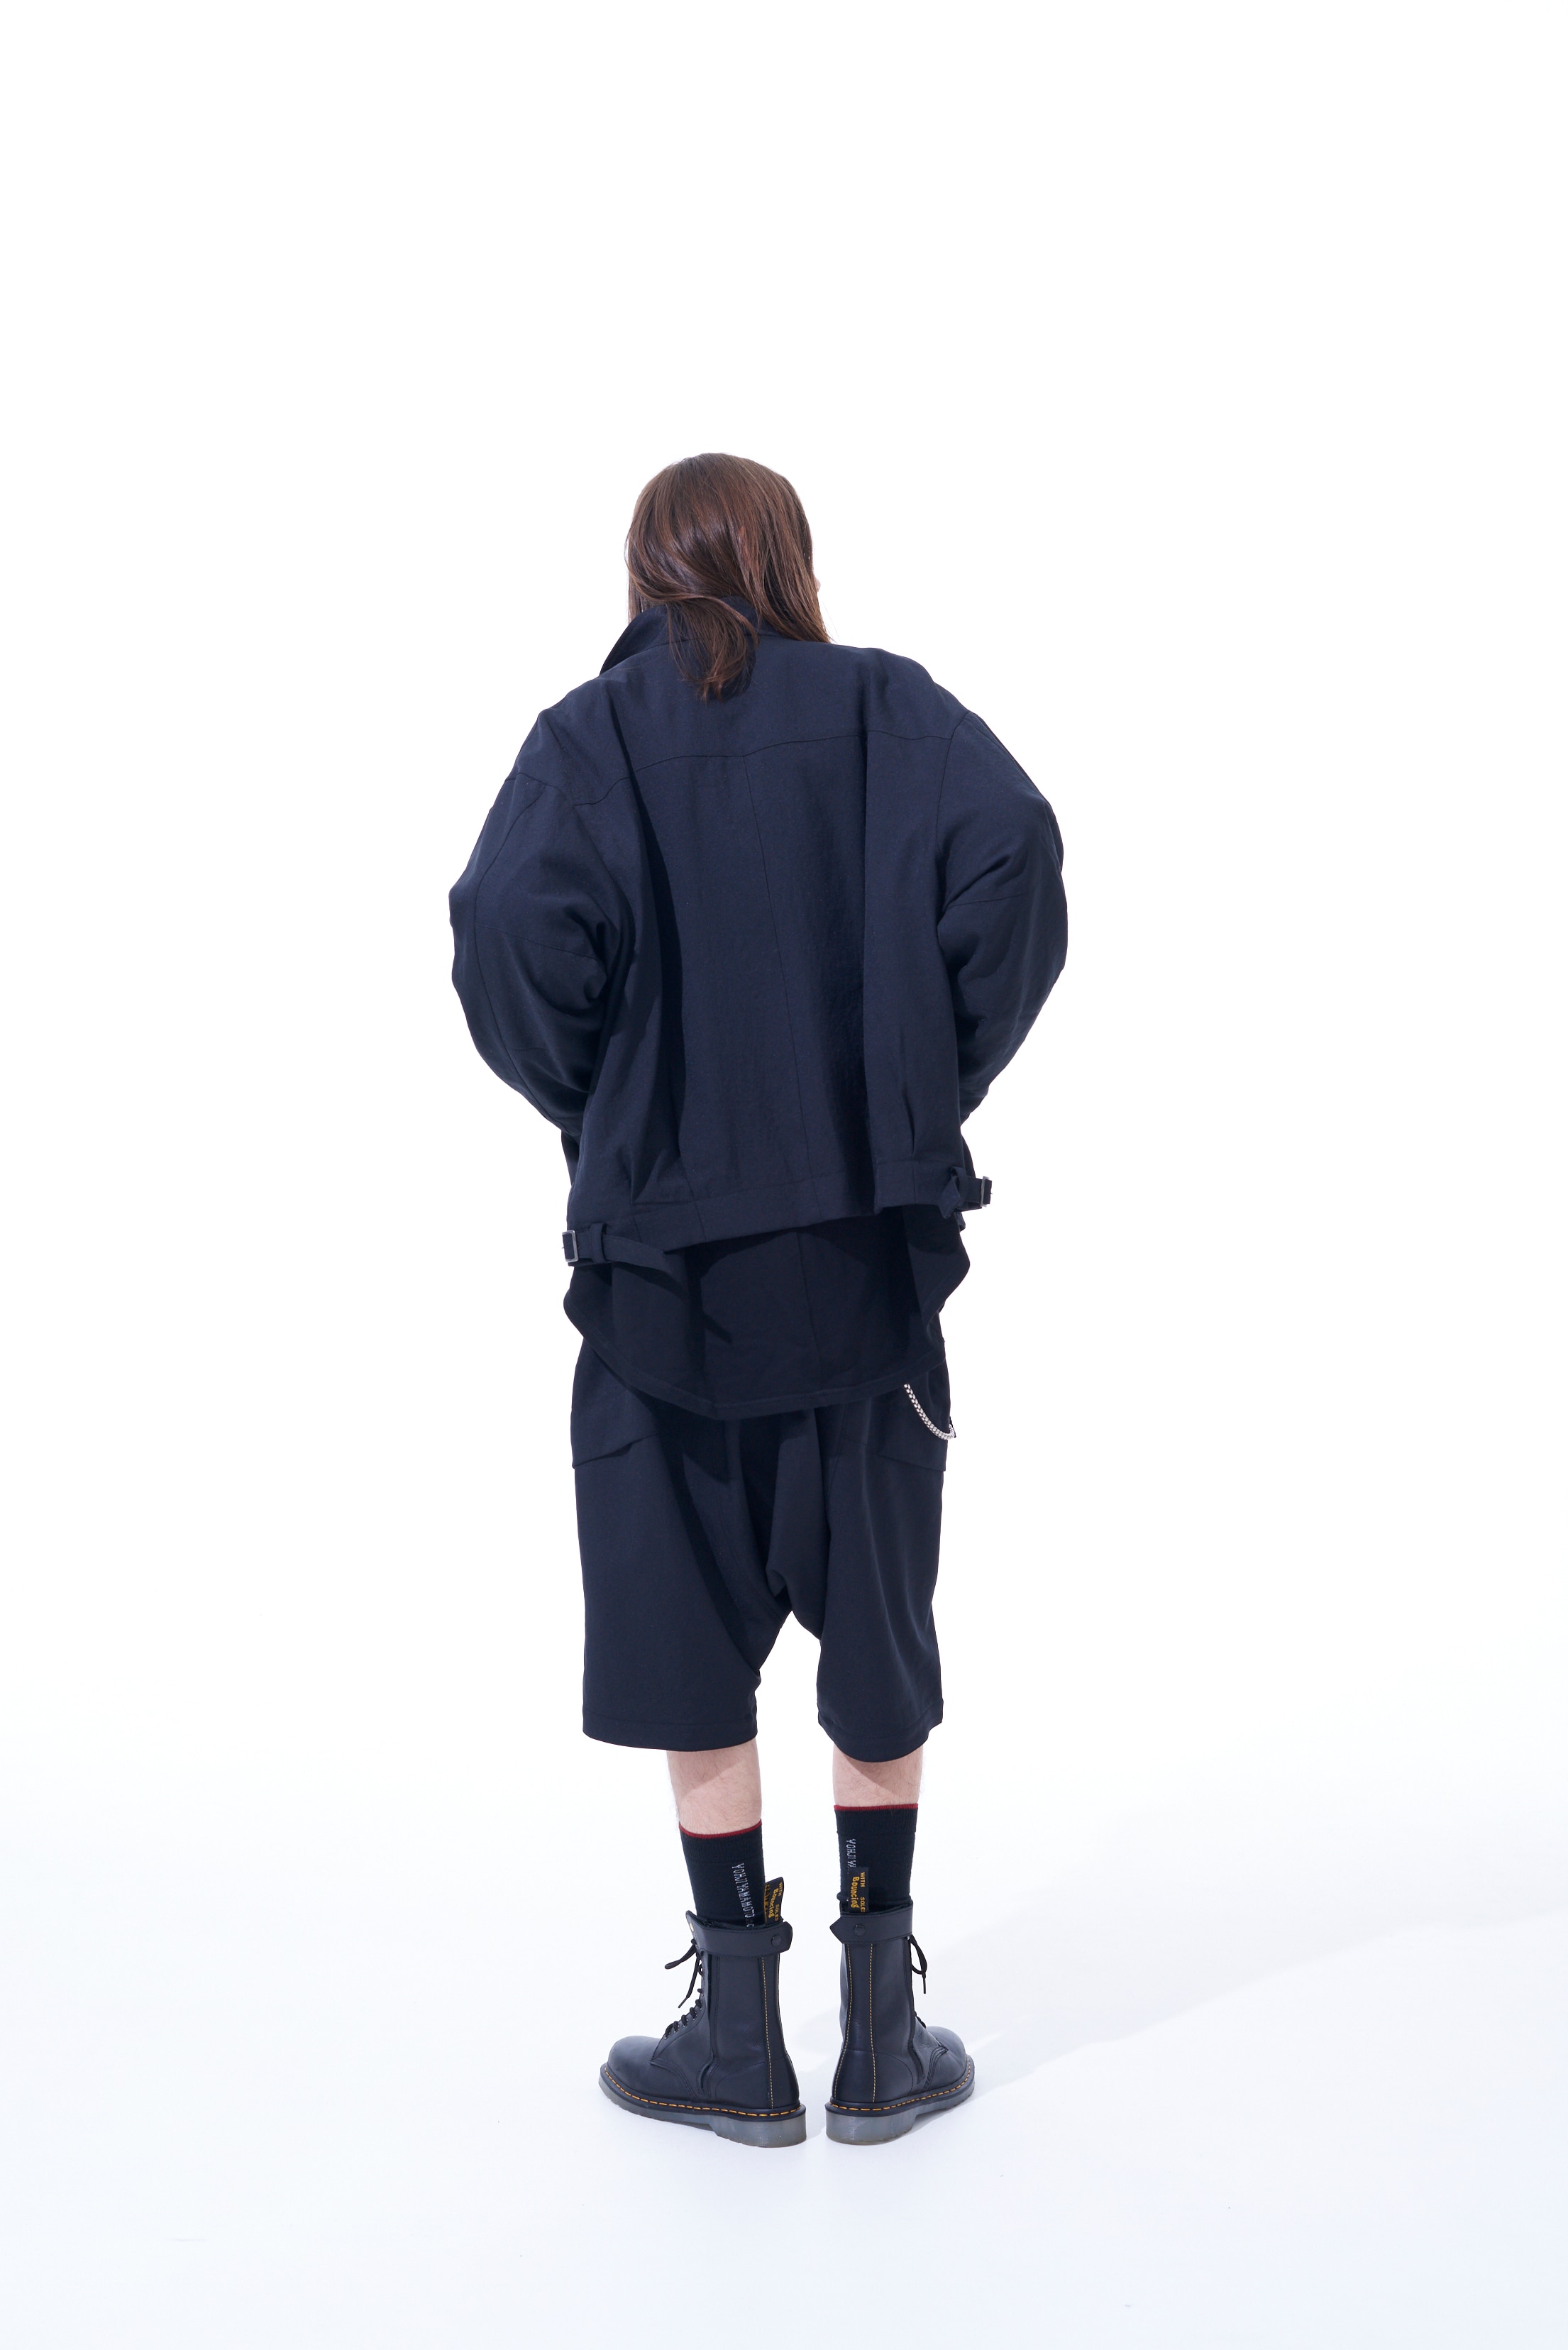 PE/STRETCH TWILL OVERSIZED STAND COLLAR BLOUSON WITH FUNCTIONAL 